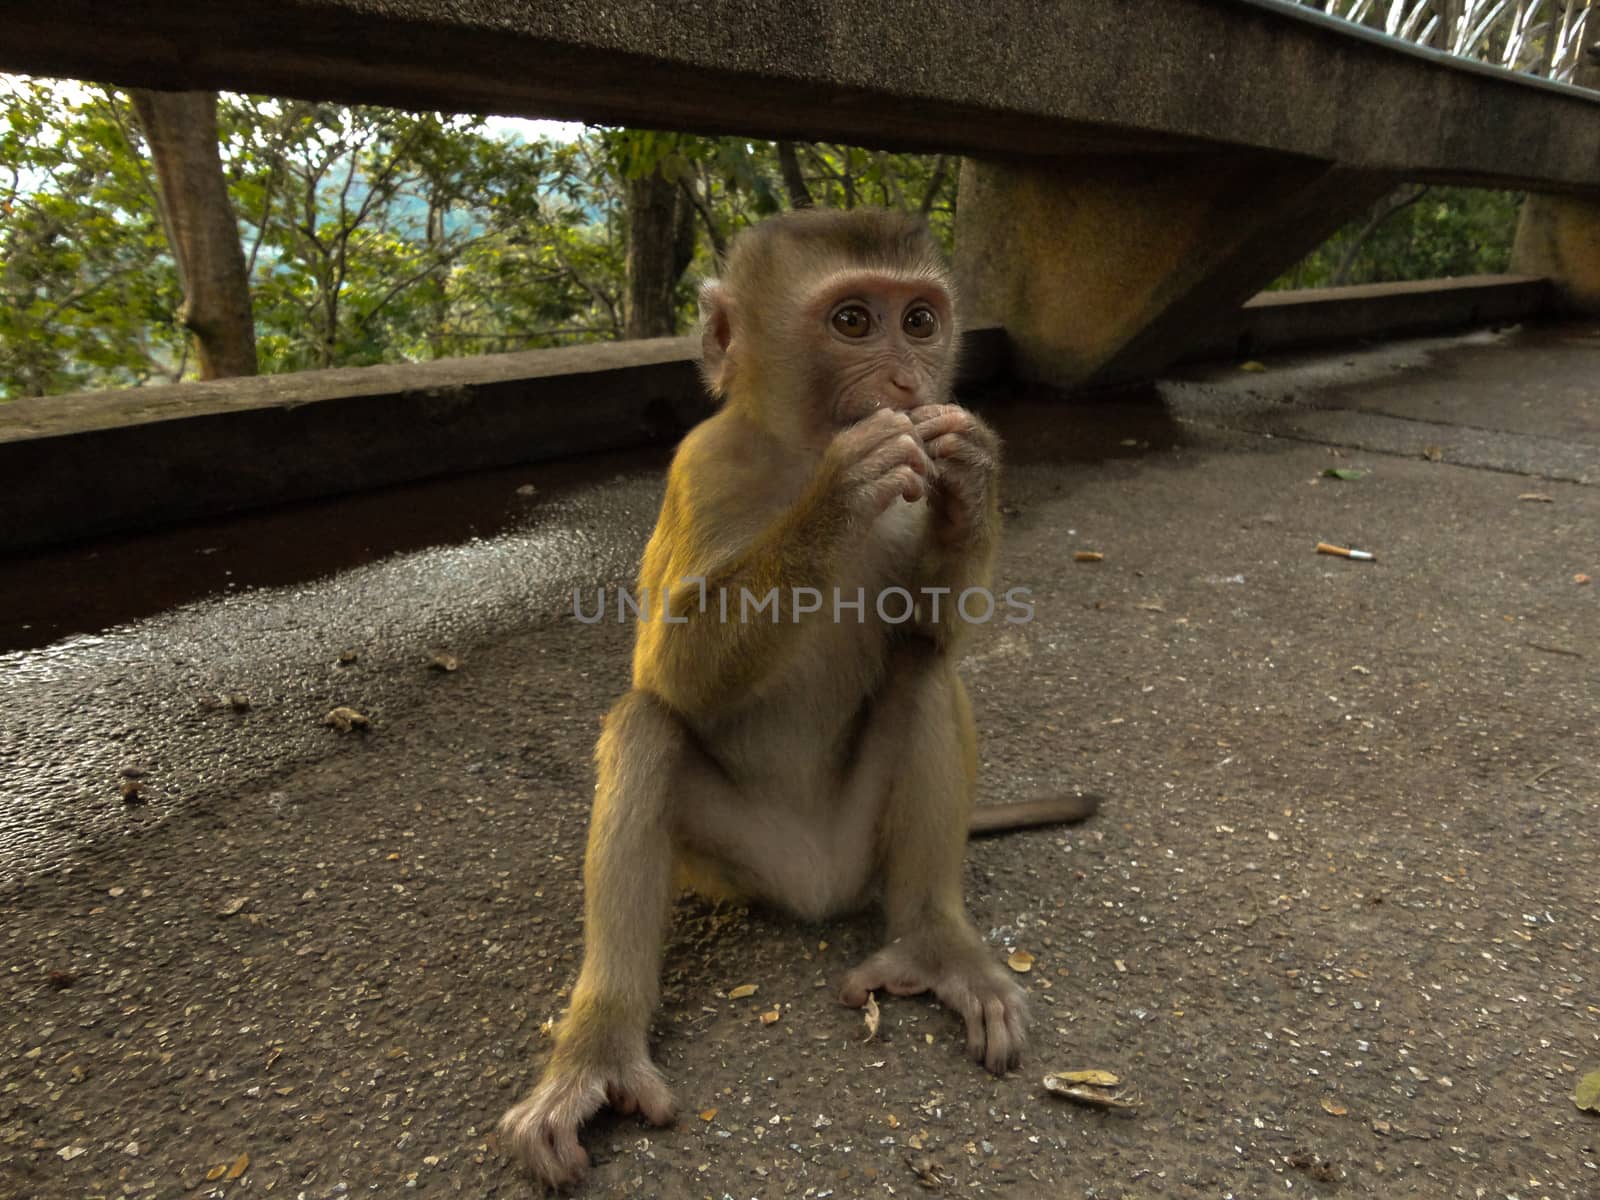 young macaca monkey sitting on stone playing with somthing in his hands. by evolutionnow